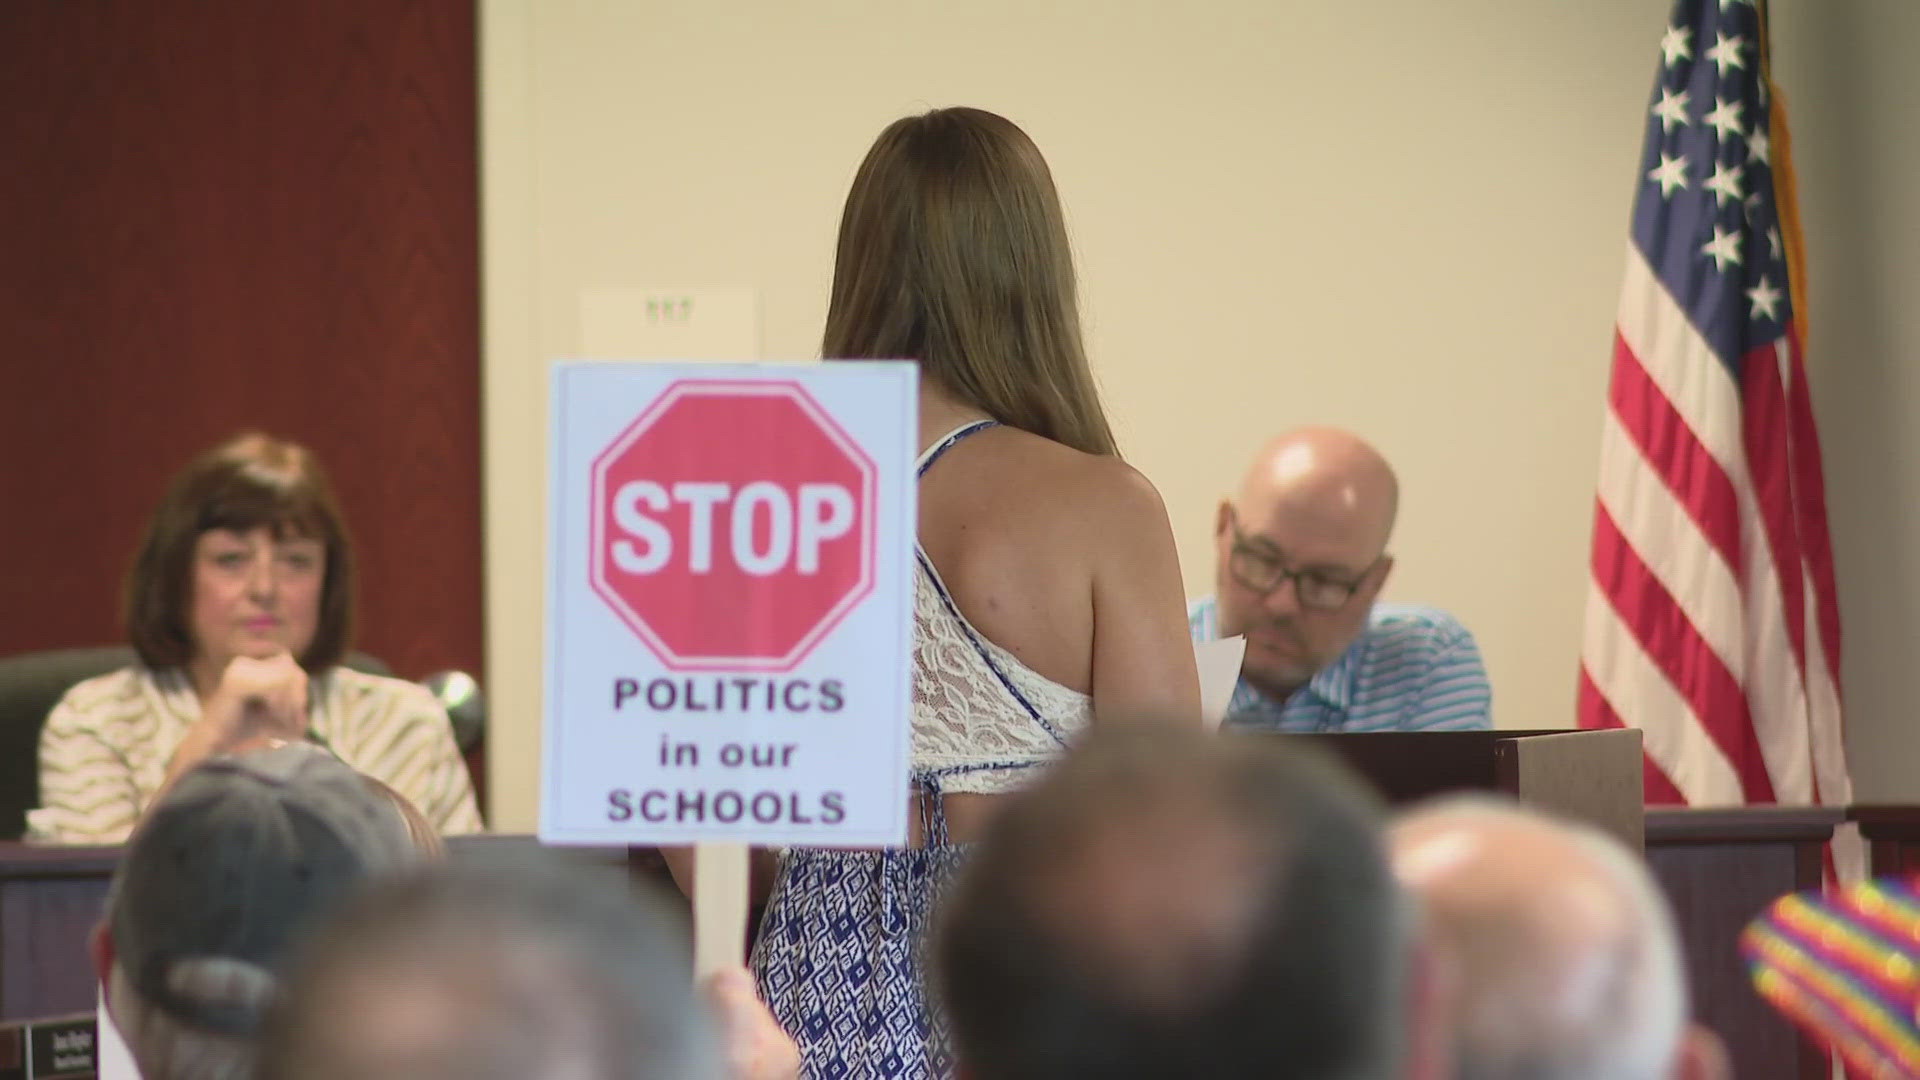 Francis Howell School District Board of Education considered new policies and regulations for the upcoming school year. The proposed policies even sparked a protest.